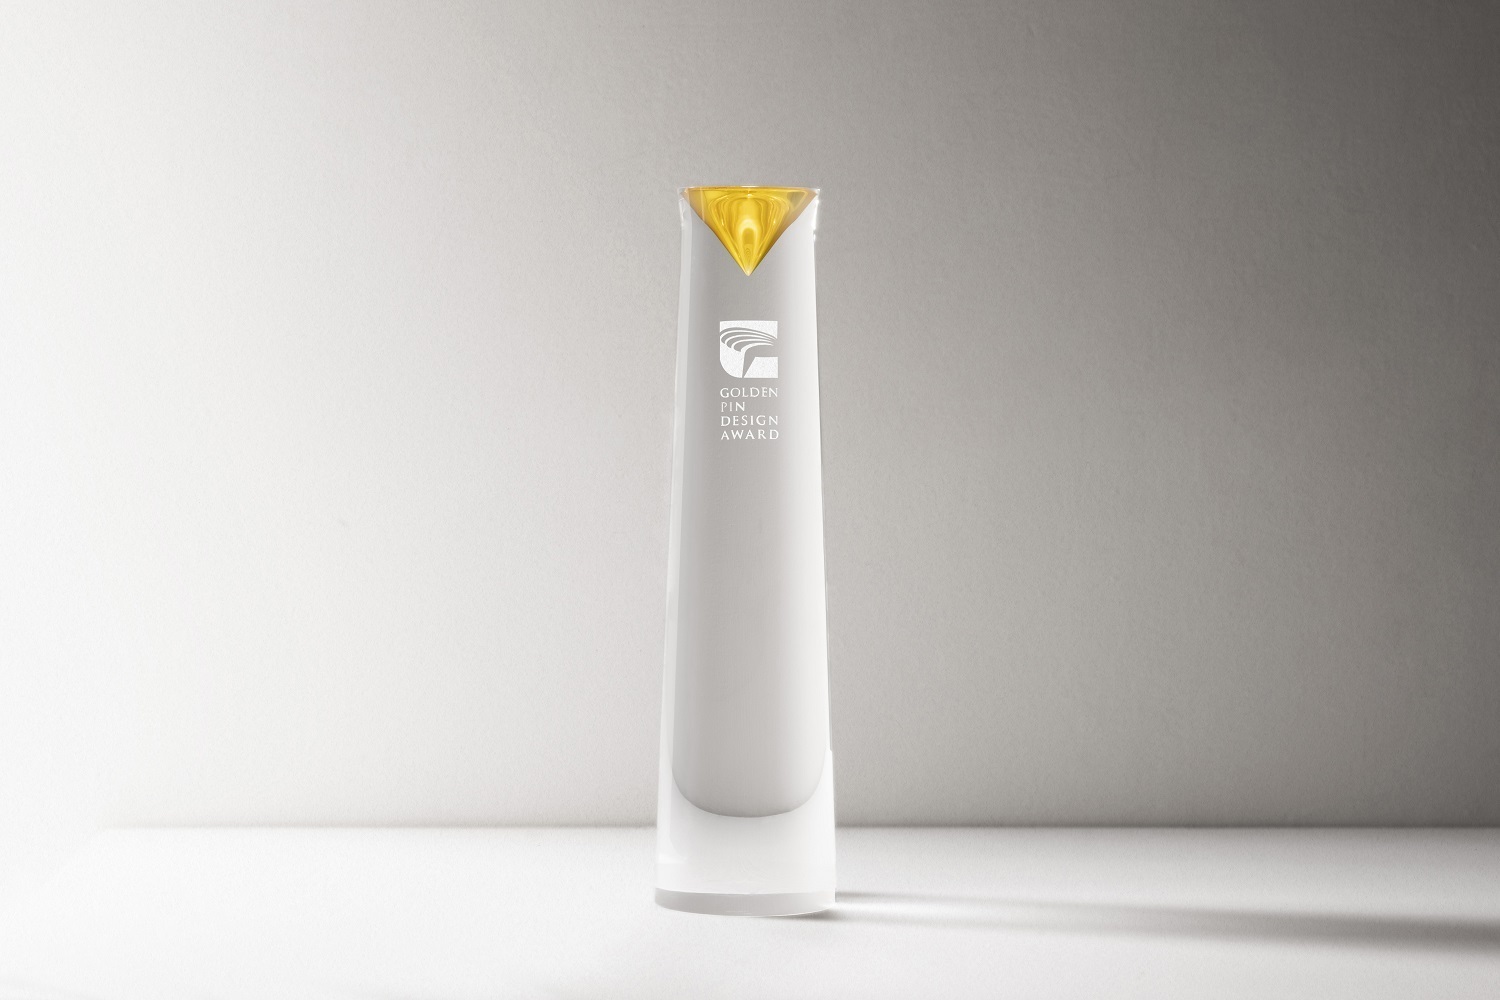 The New Trophy for the Golden Pin Design Award is Unveiled!